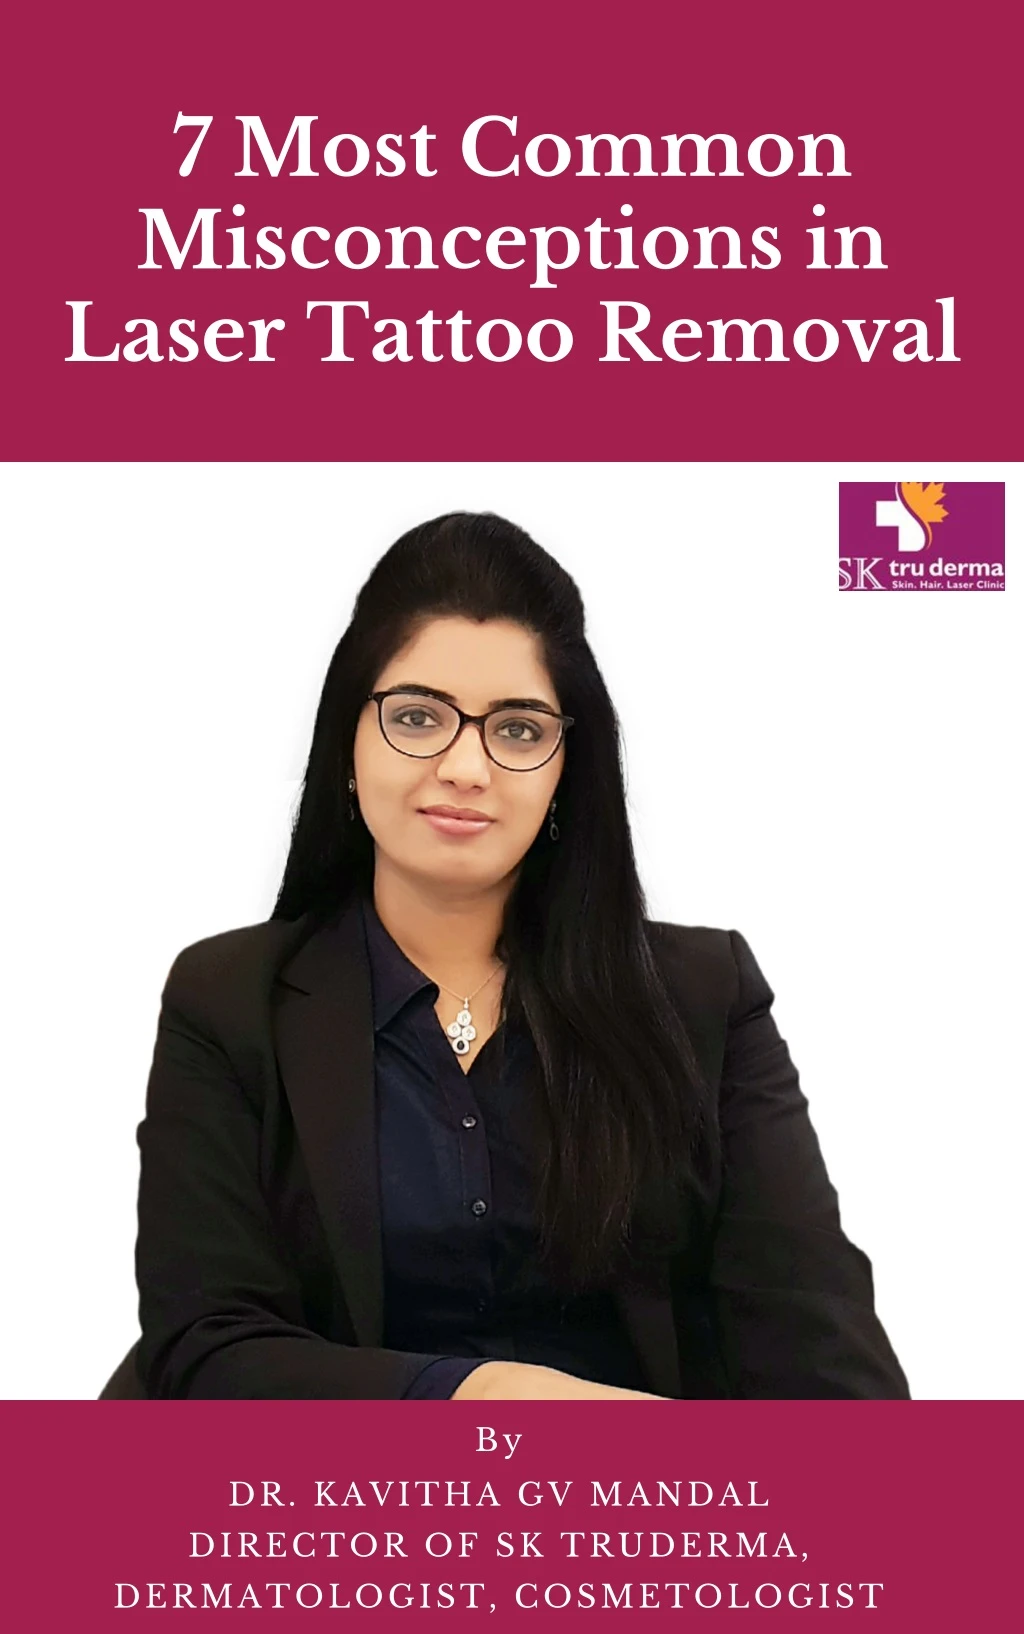 7 most common misconceptions in laser tattoo